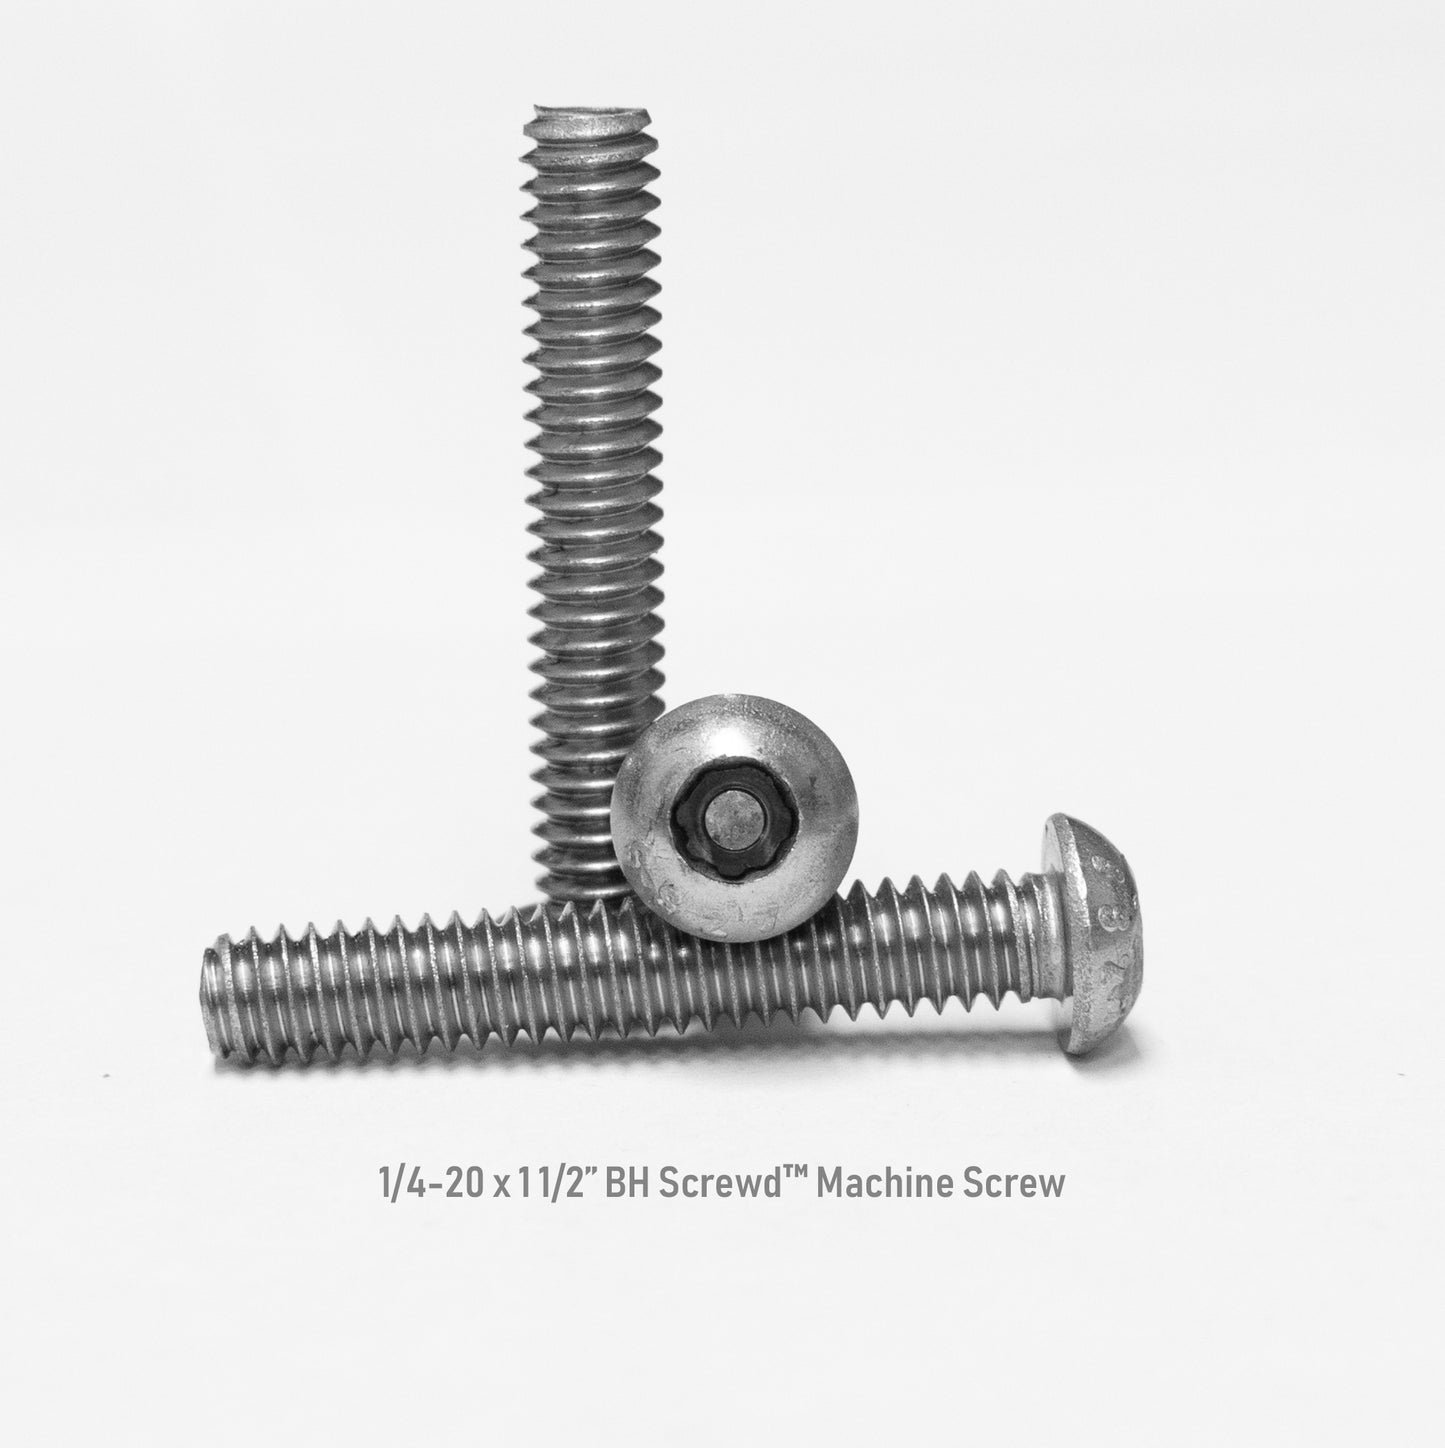 1/4-20 x 1 1/2" Button Head Screwd® Security  Machine Screw Made out of Stainless Steel